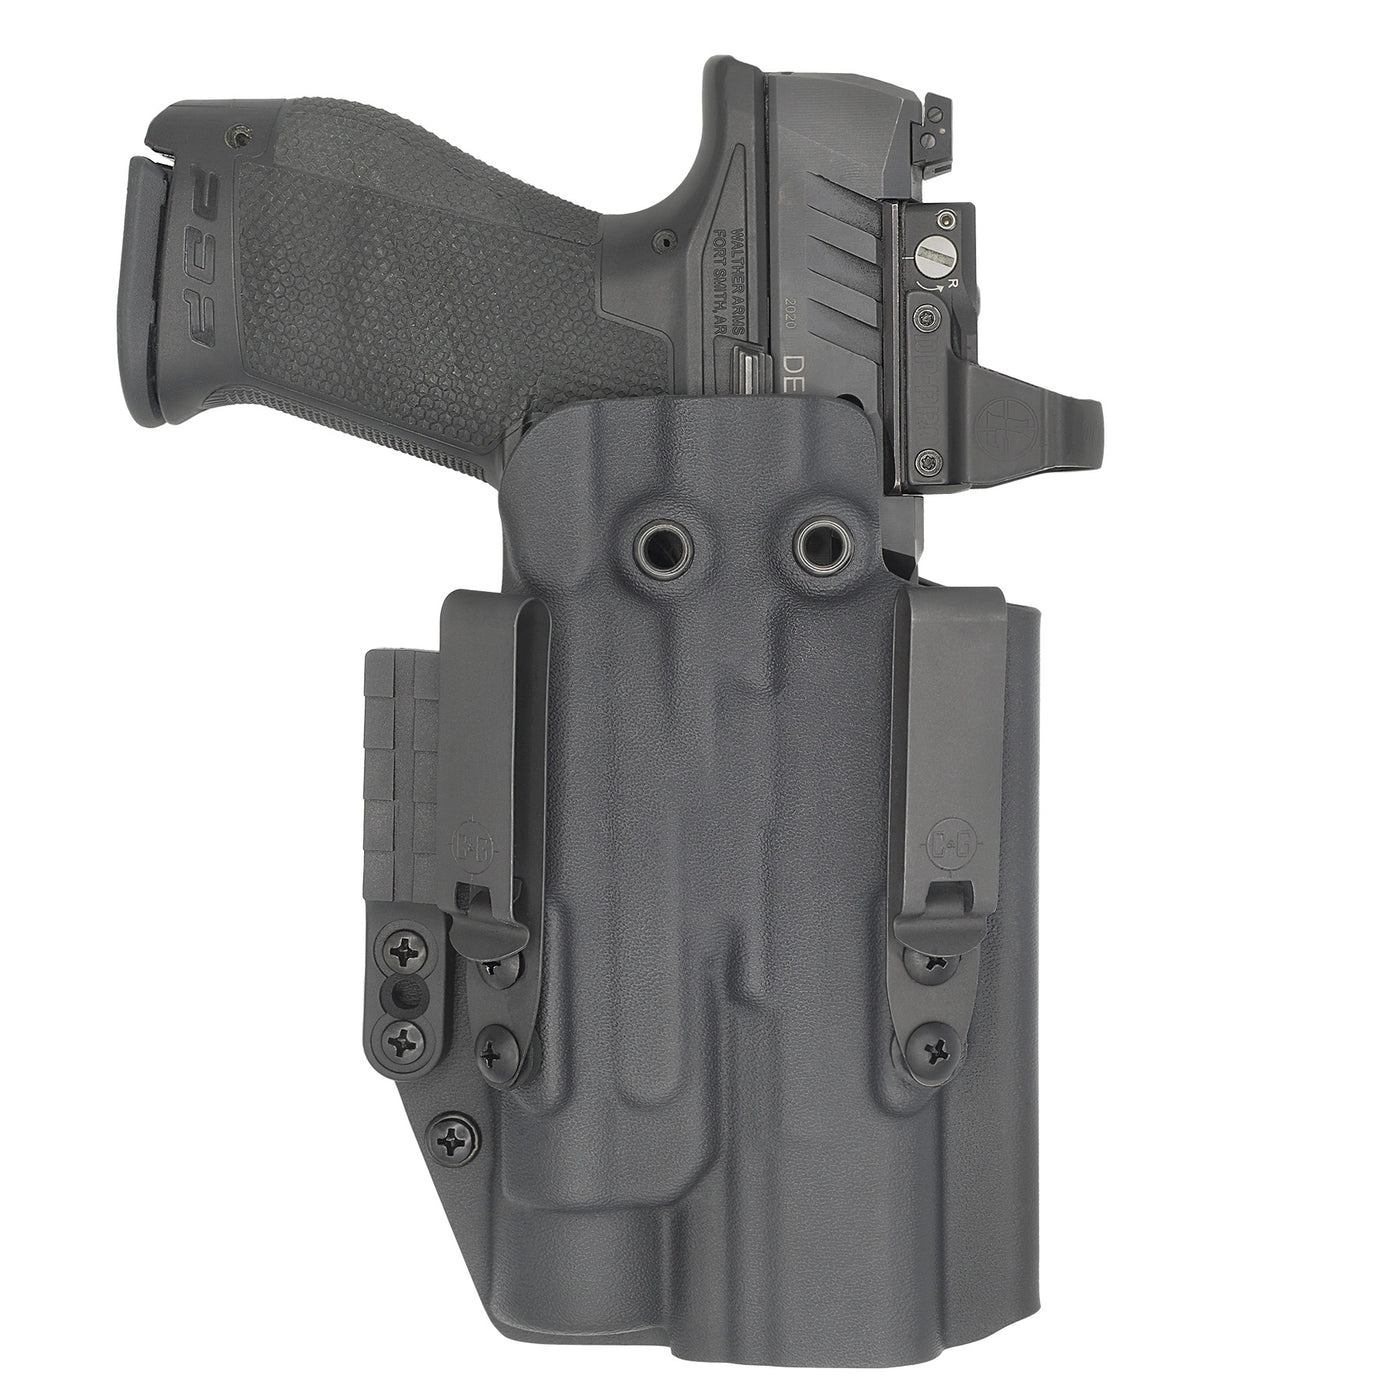 C&G Holsters Quickship IWB ALPHA UPGRADE Tactical S&W M&P Streamlight TLR1/HL in holstered position